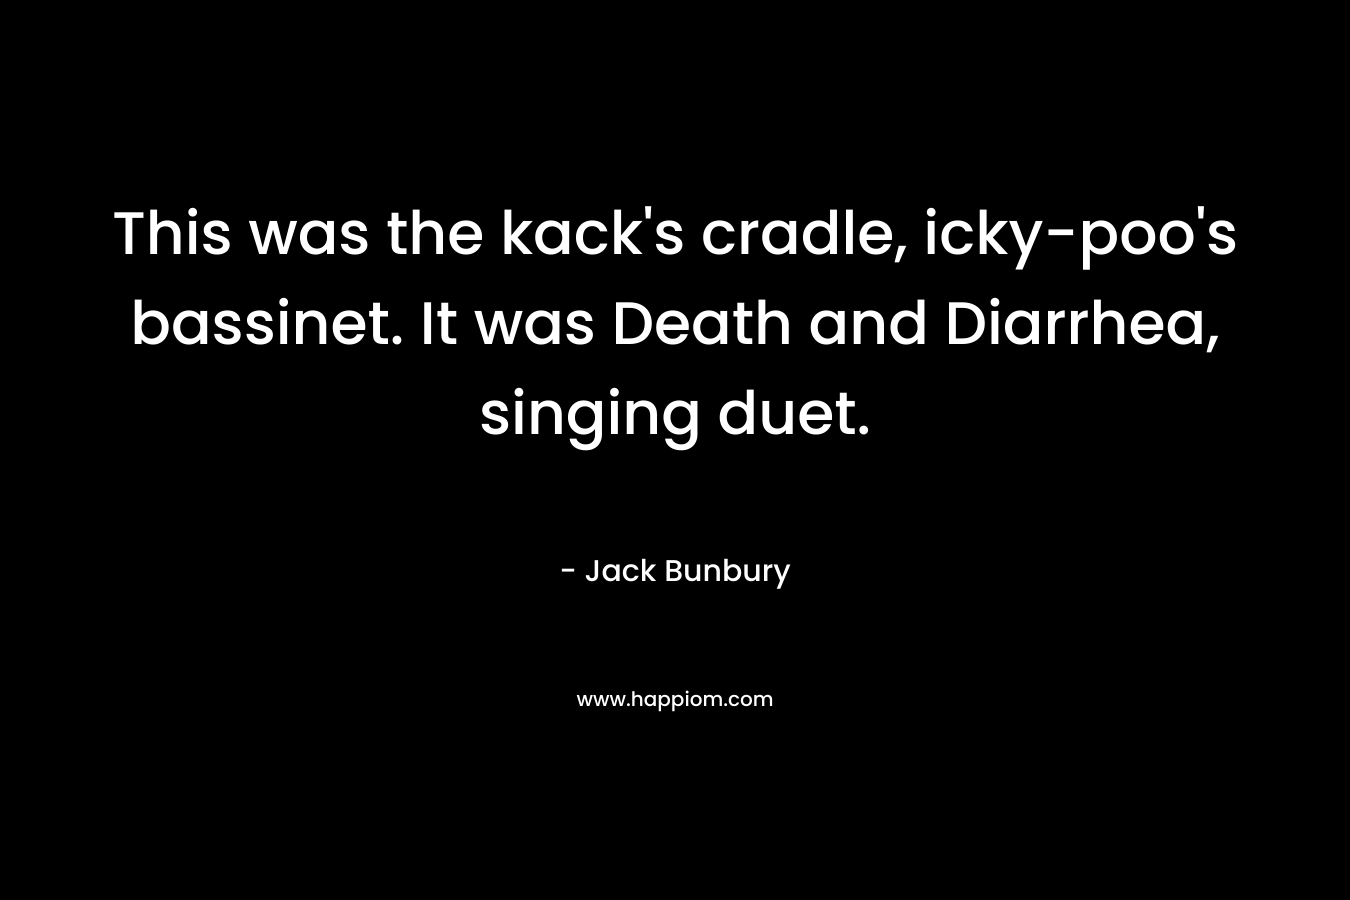 This was the kack's cradle, icky-poo's bassinet. It was Death and Diarrhea, singing duet.